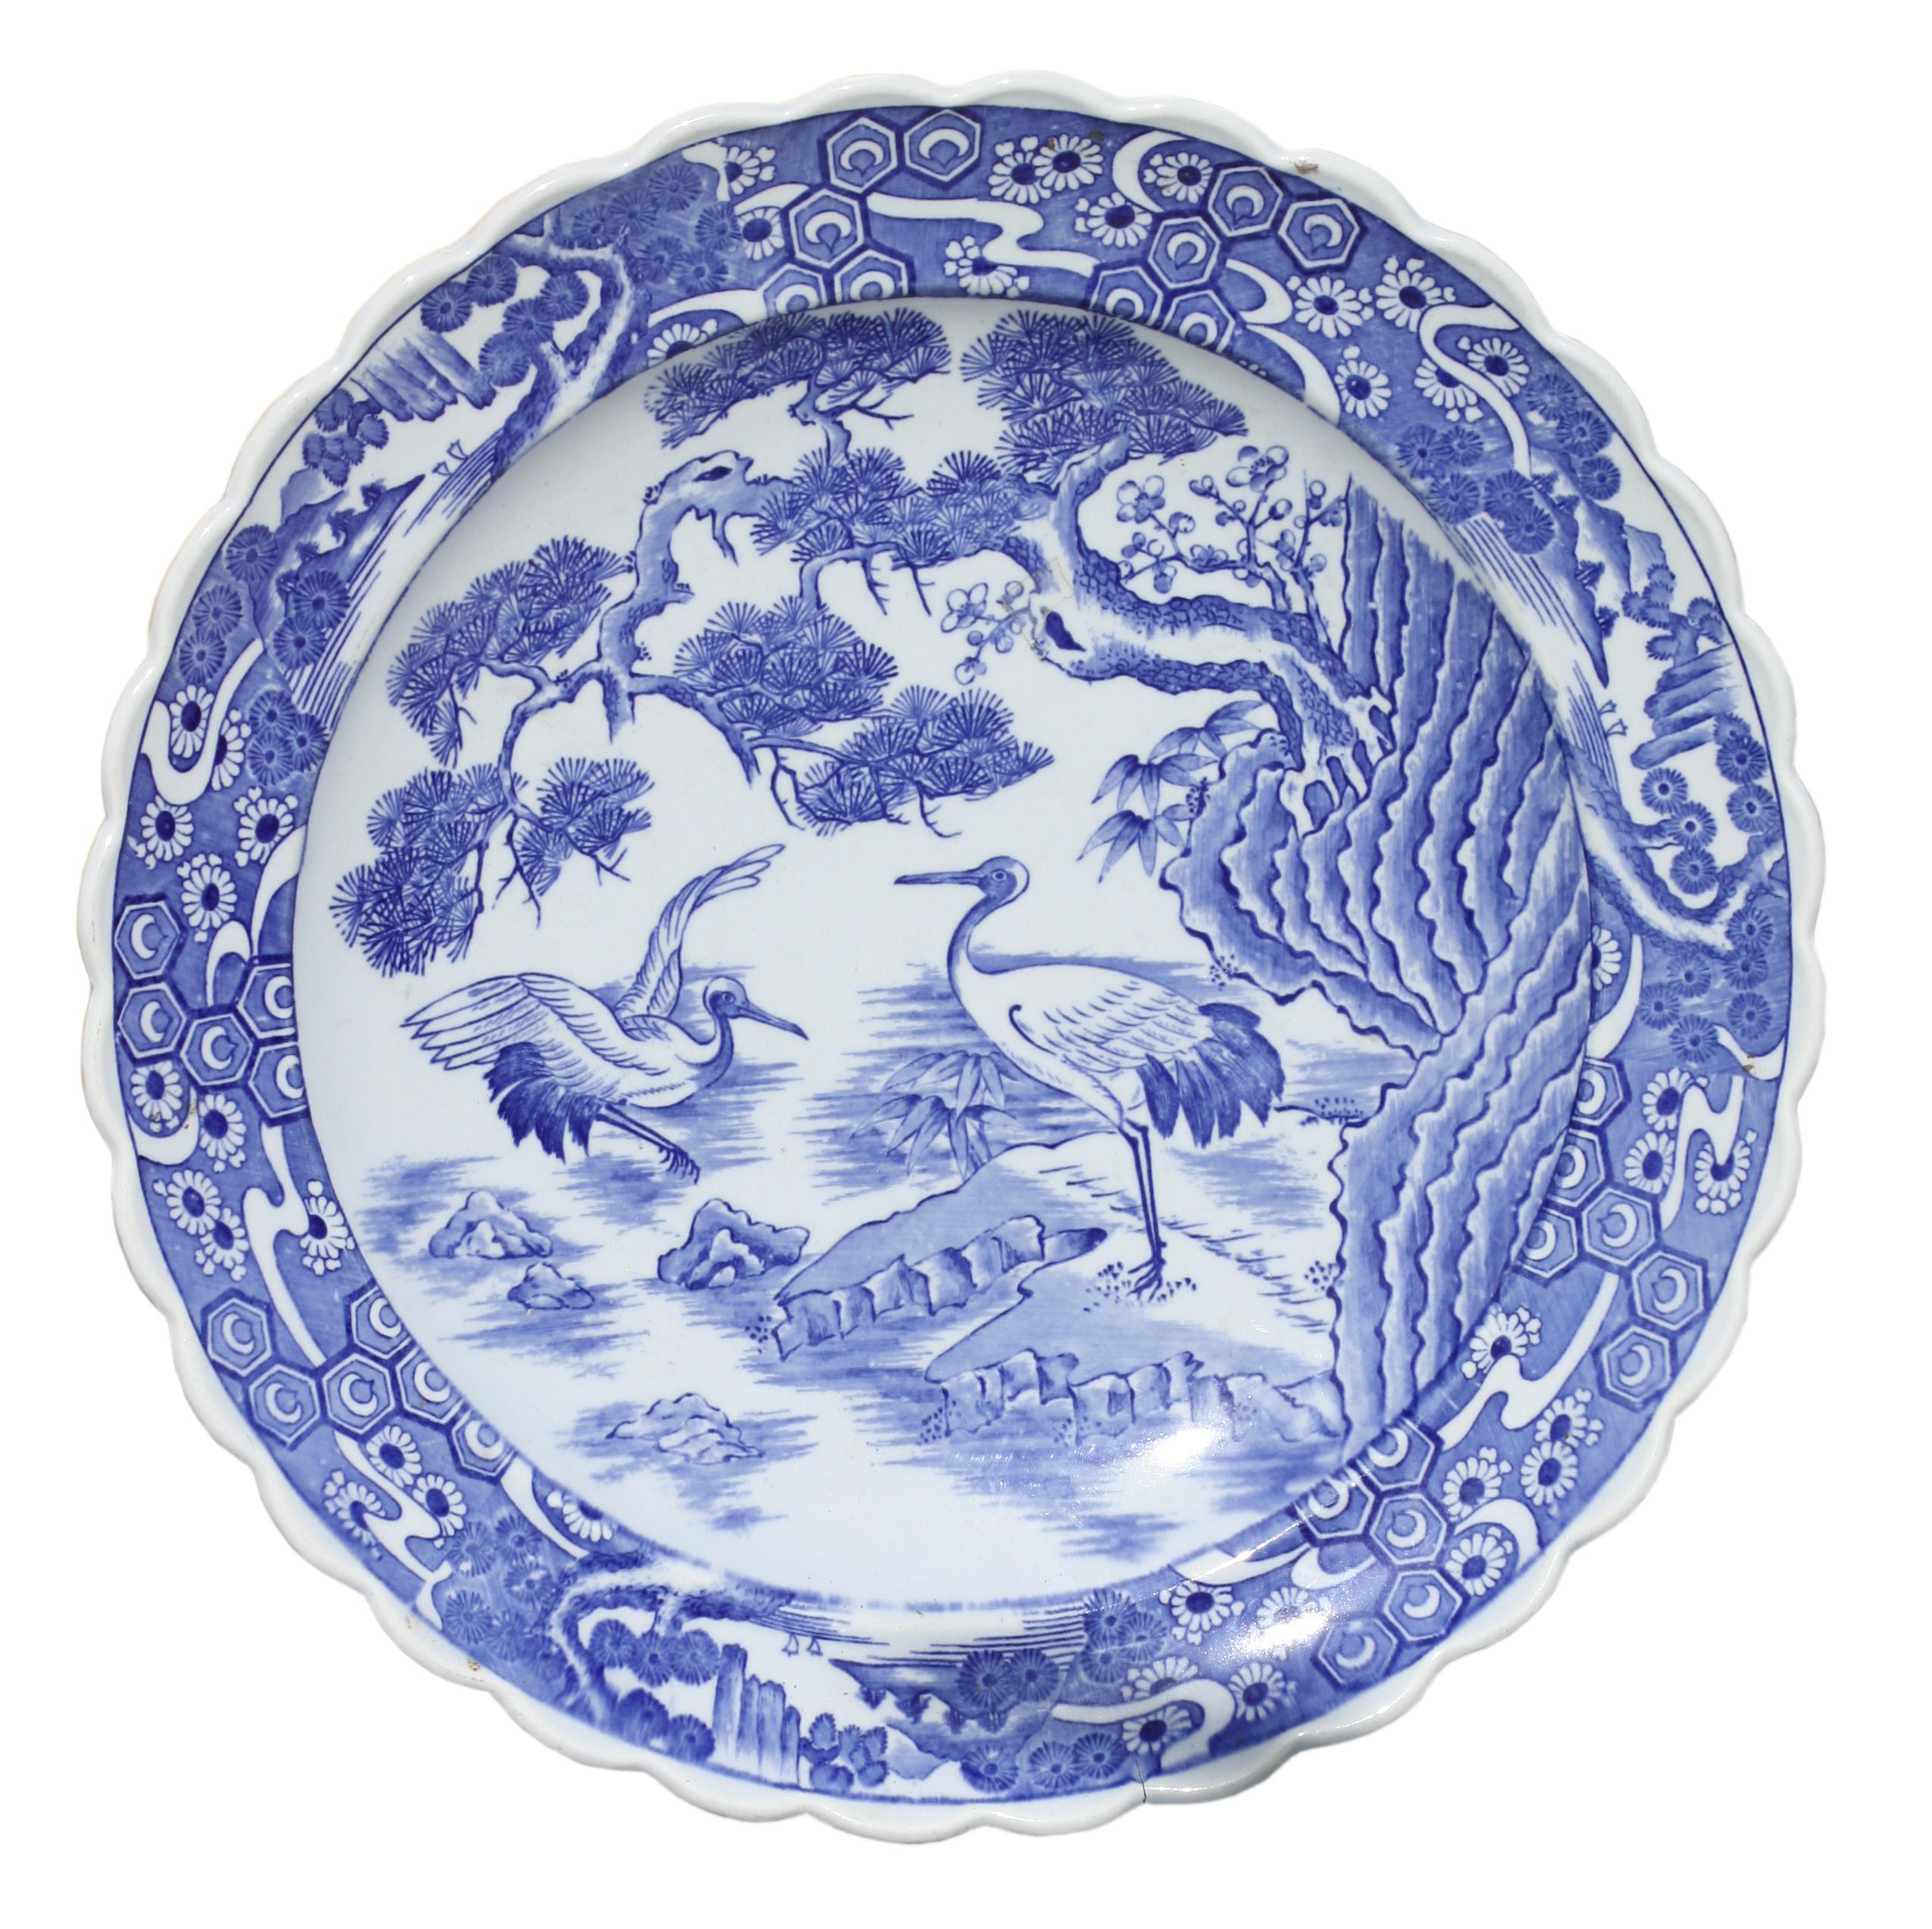 
JAPANESE BLUE AND WHITE DECORATED PORCELAIN PLATE, MEIJI PERIOD (1868-1912)
the underside with impressed signature, with a tightly scalloped edge, border of stylized motifs, the center recess representing two cranes in a stylized marsh.

Diameter